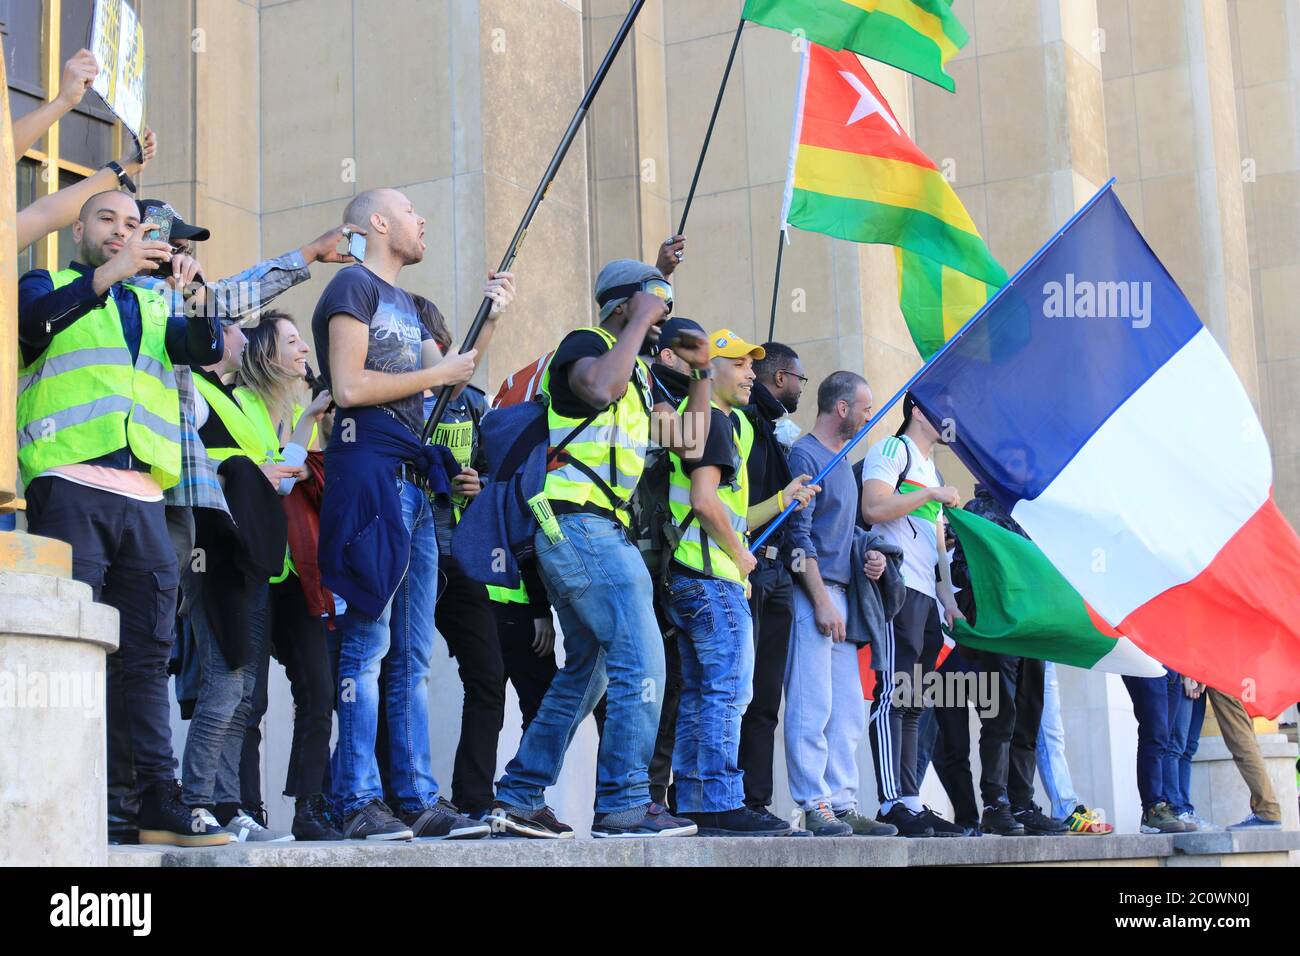 Angry yellow vest protesters screaming and waving flags at Trocadero in Paris France Stock Photo